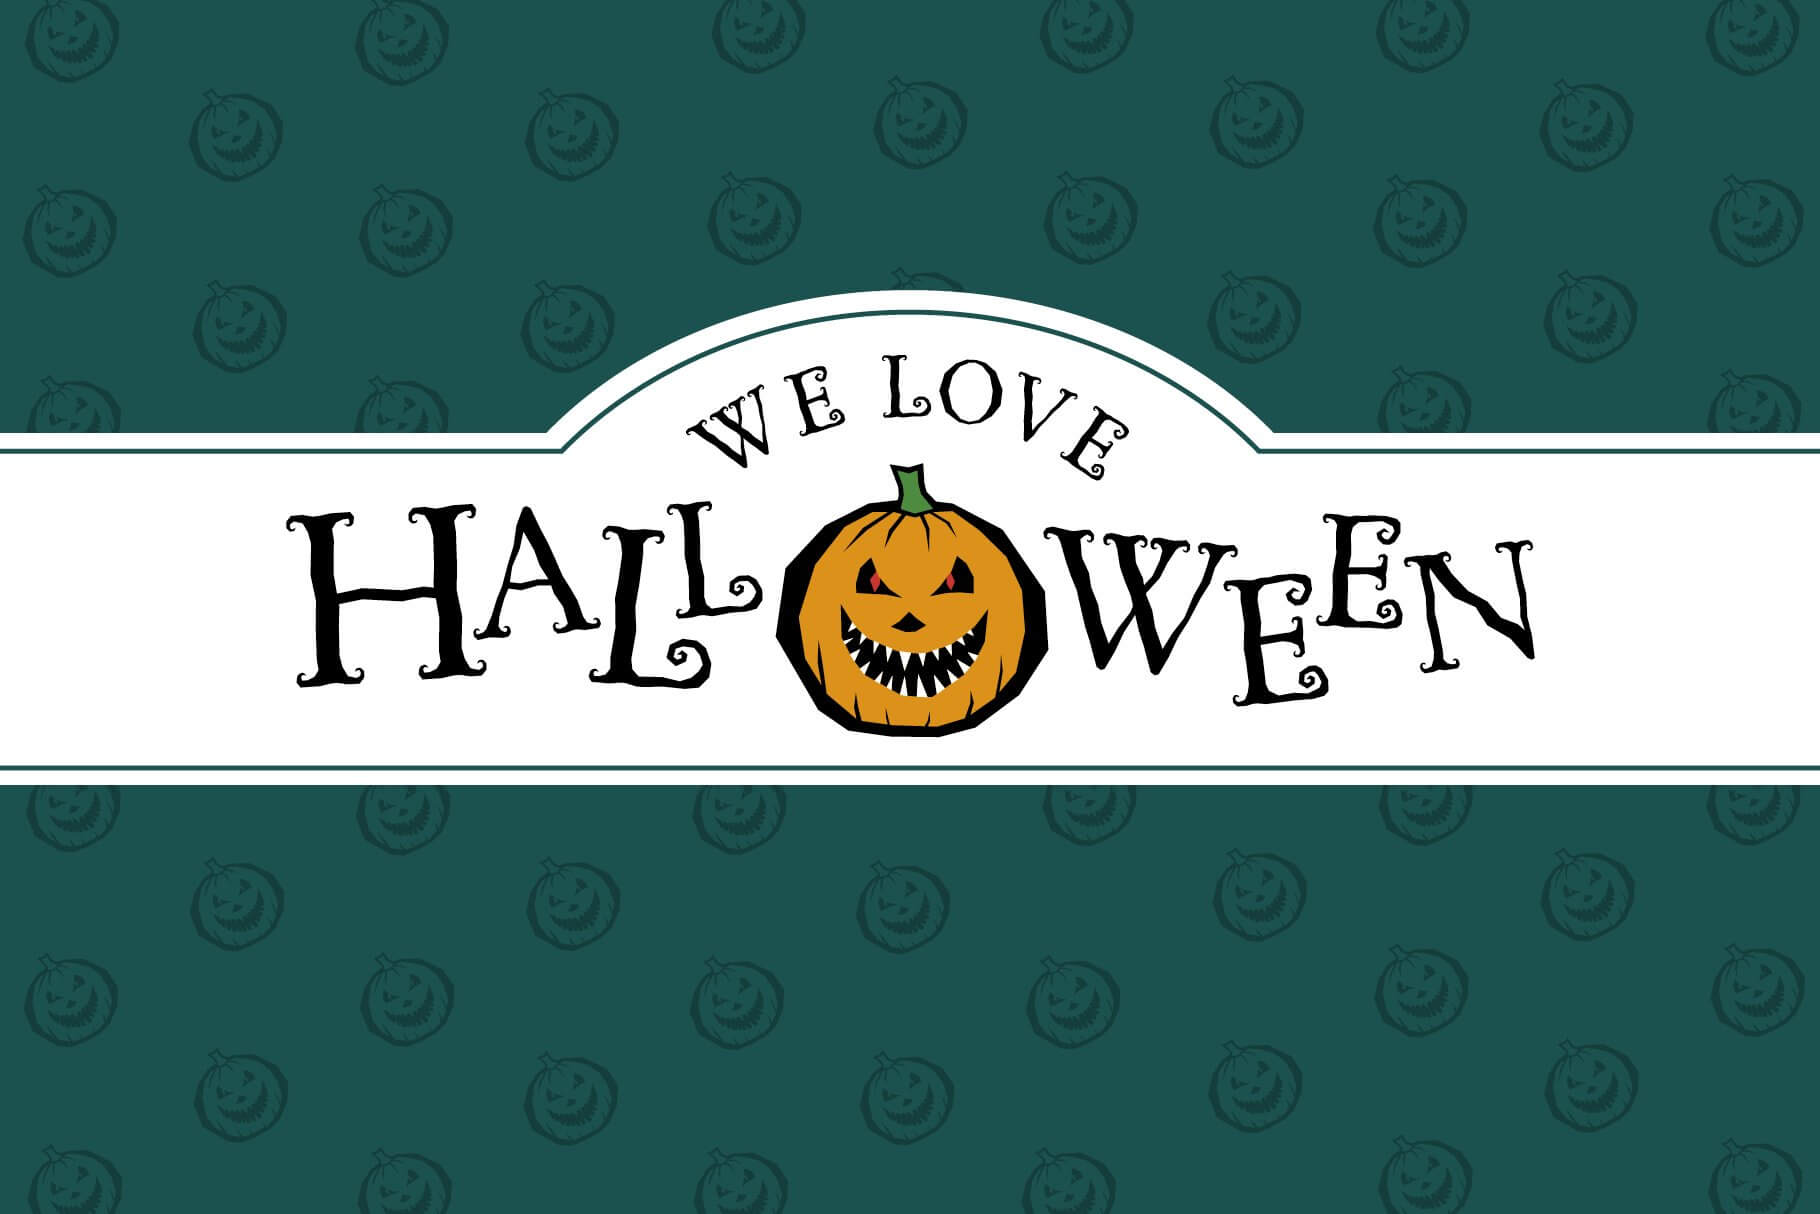 billy witch halloween style serif font.